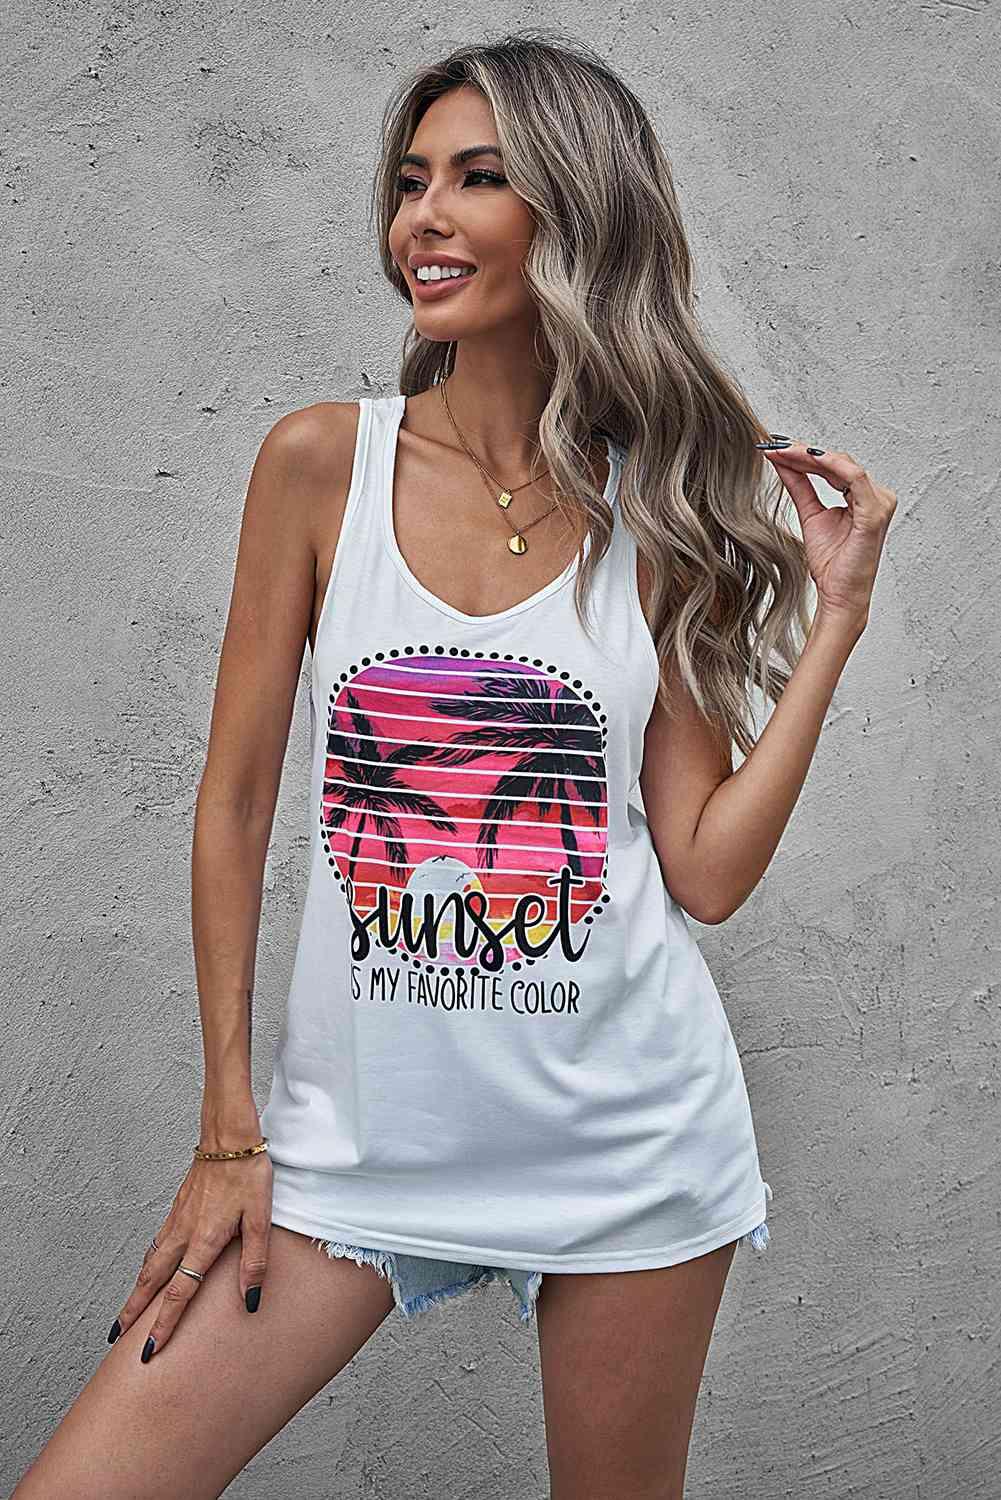 Sunset Is My Favorite Color Tank - Immenzive